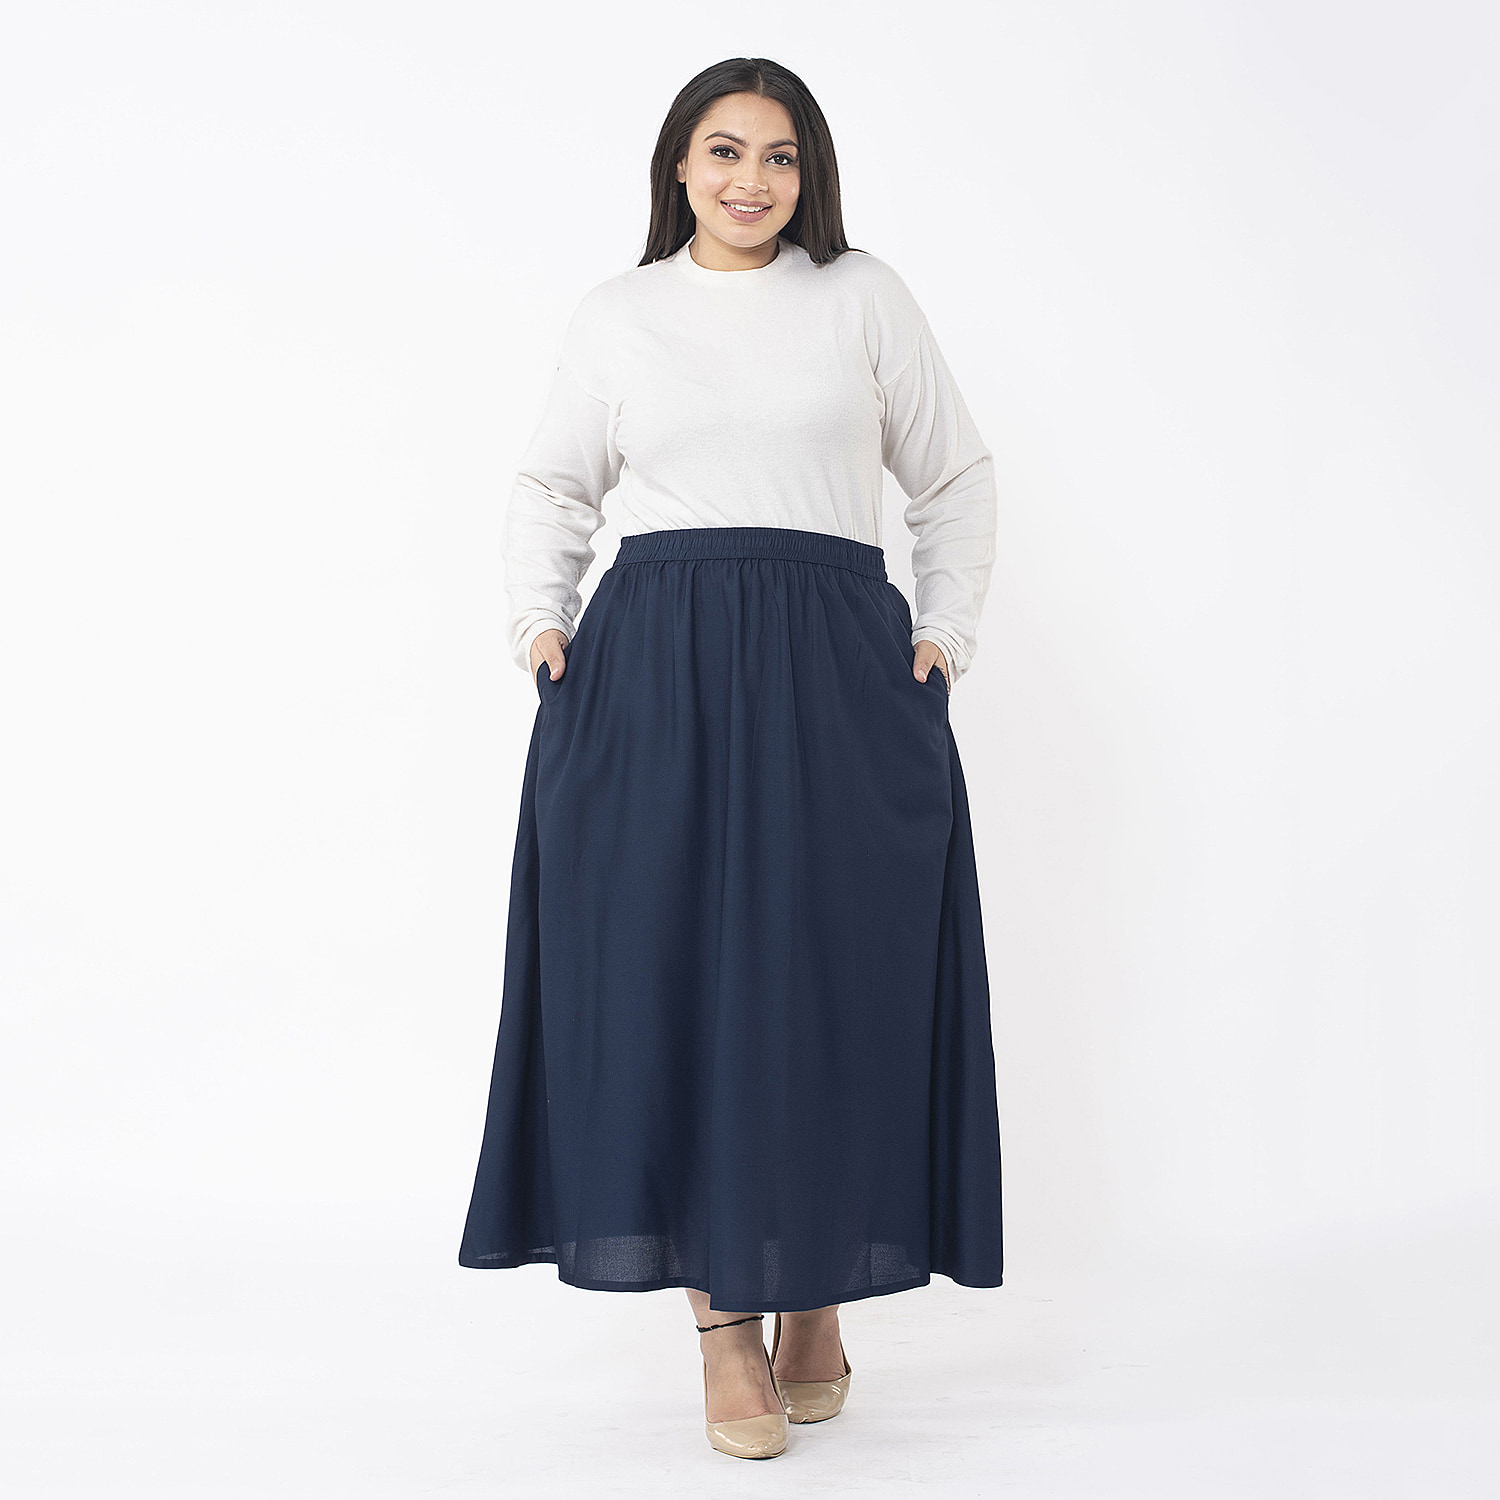 Tamsy-Viscose-Solid-Skirt-Size-88x1-cm-Navy-Navy